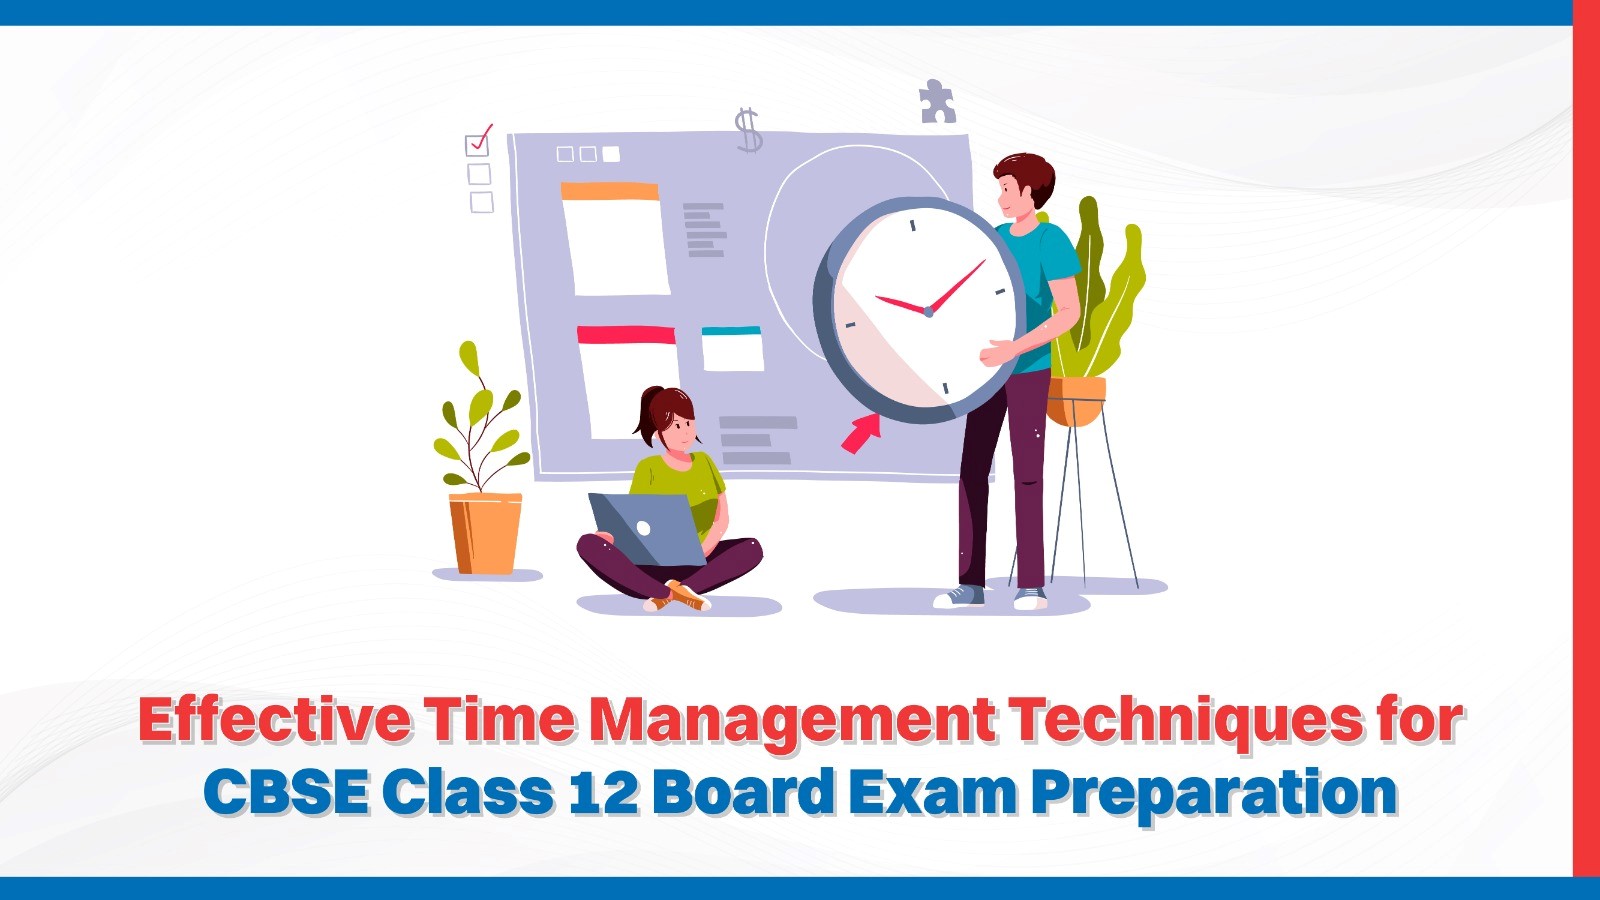 Effective Time Management Techniques for CBSE Class 12 Board Exam Preparation.jpg